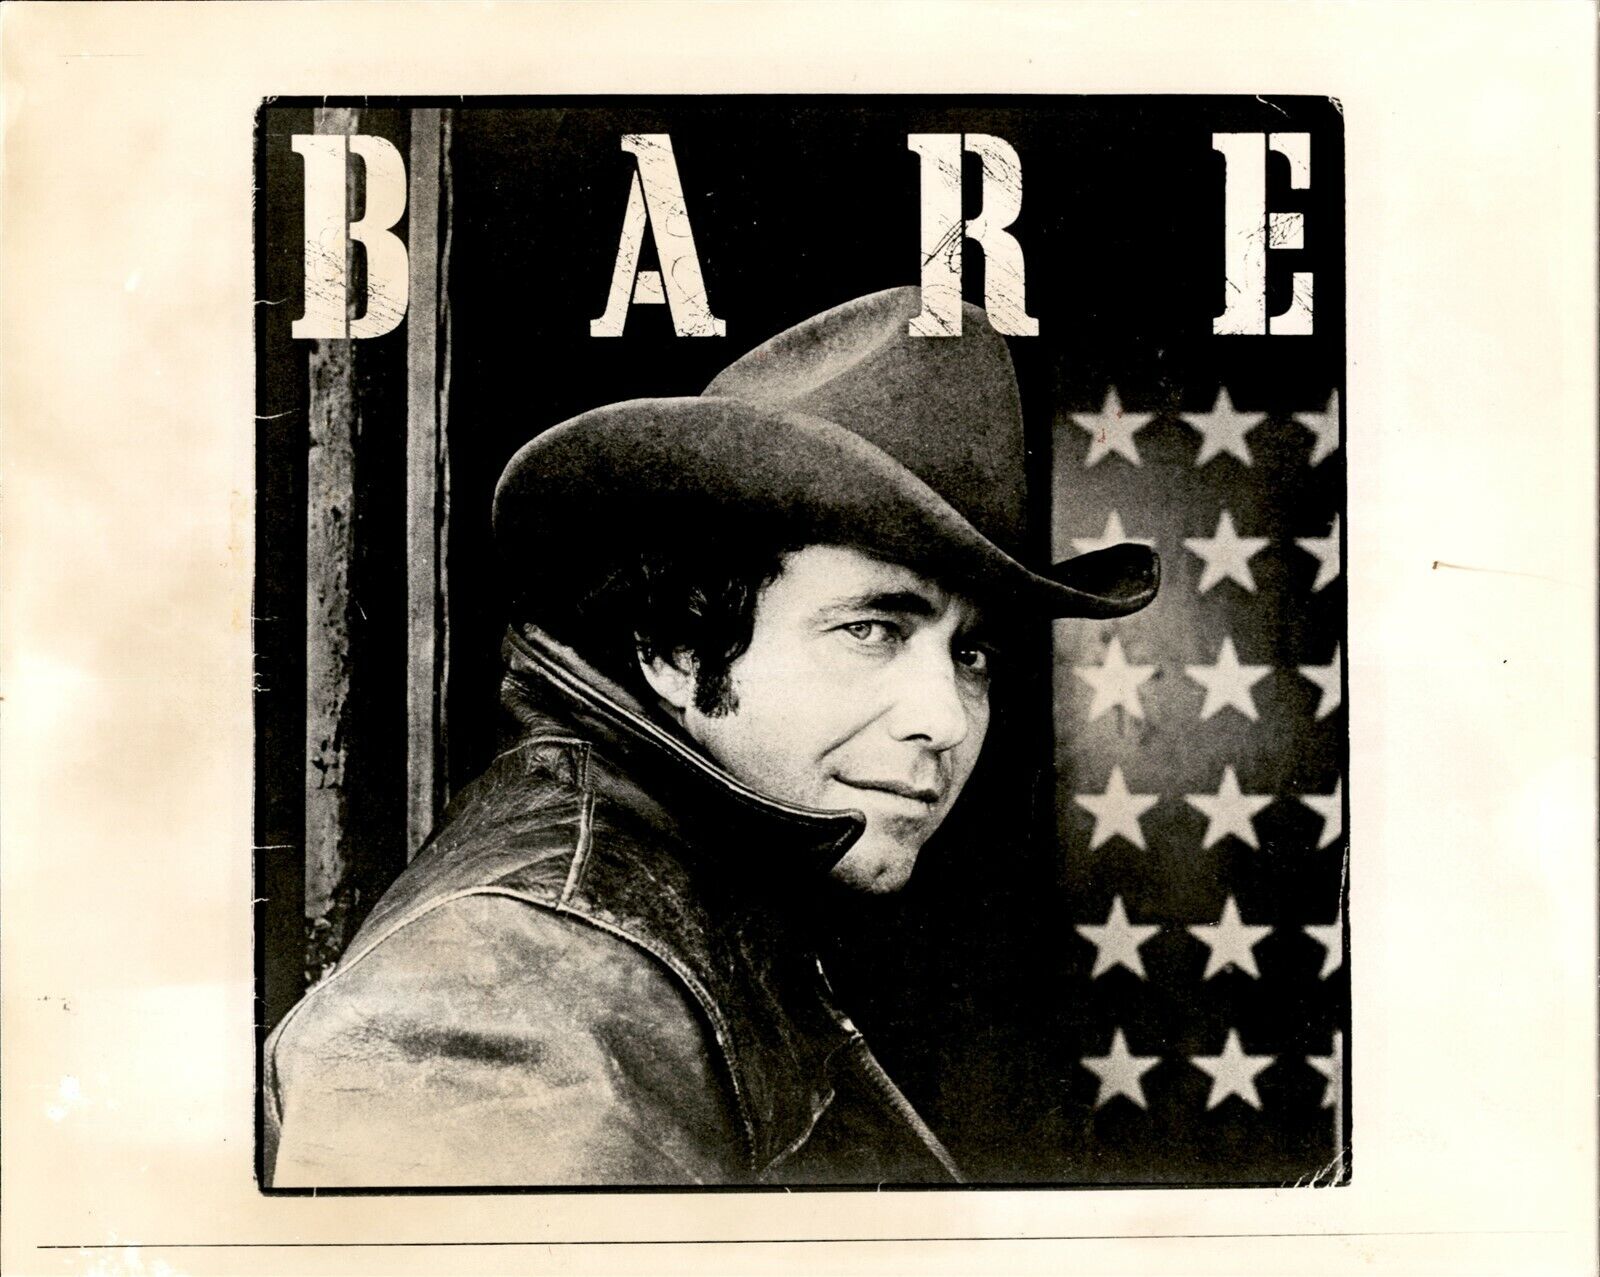 LG935 1978 Orig Photo BOBBY BARE Handsome American Outlaw Country Music Singer